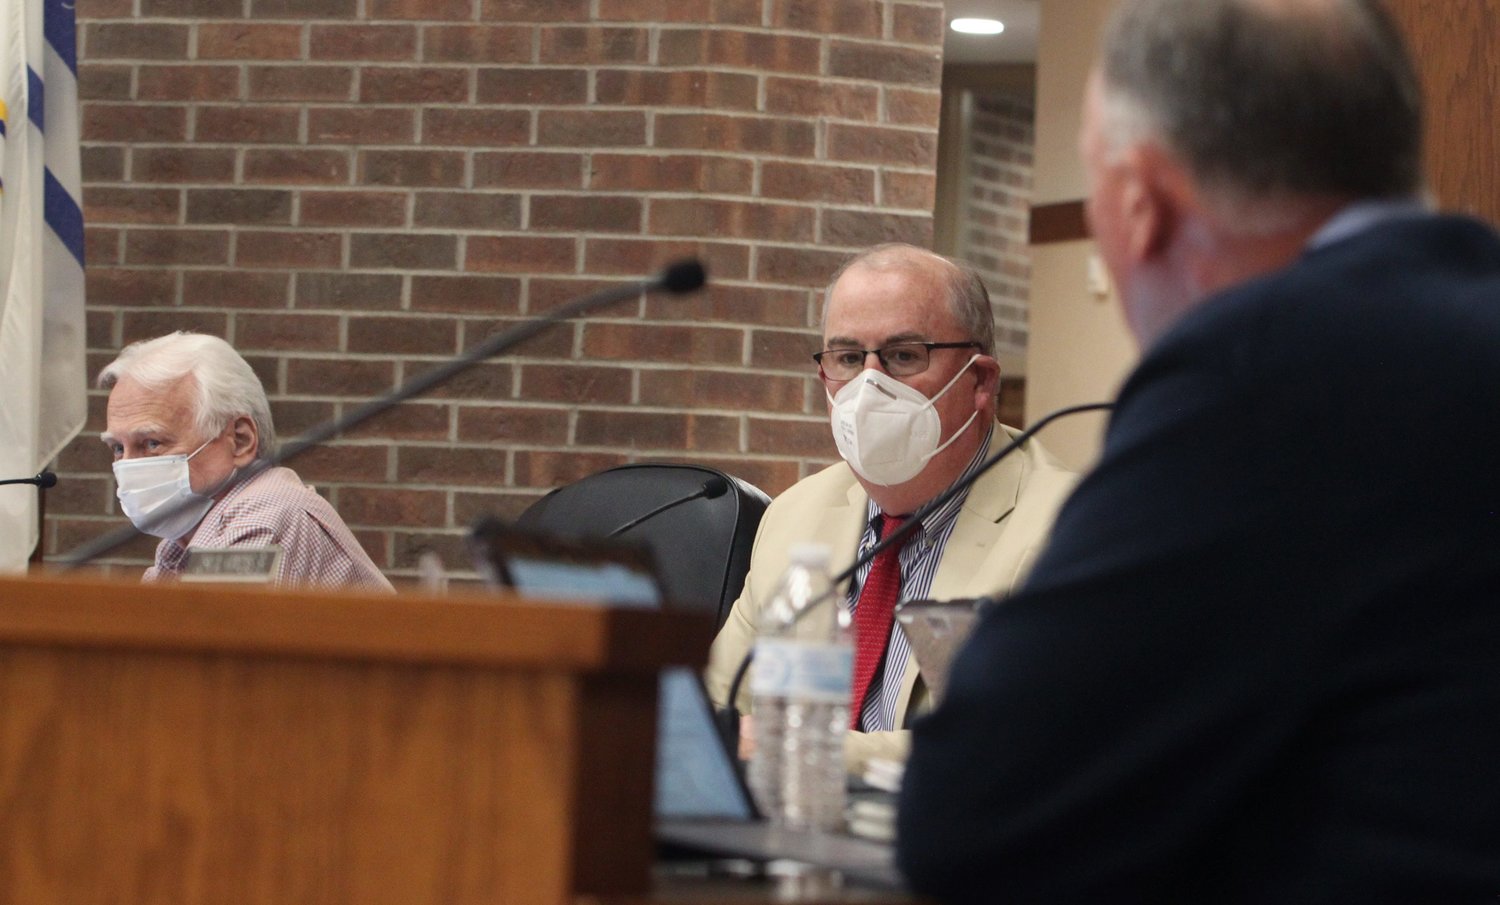 Moberly Mayor Jerry Jeffrey, middle, and councilman Tim Brubacker, left, listen to comments being made by councilman Cole Davis, right, during Monday's city council business meeting.